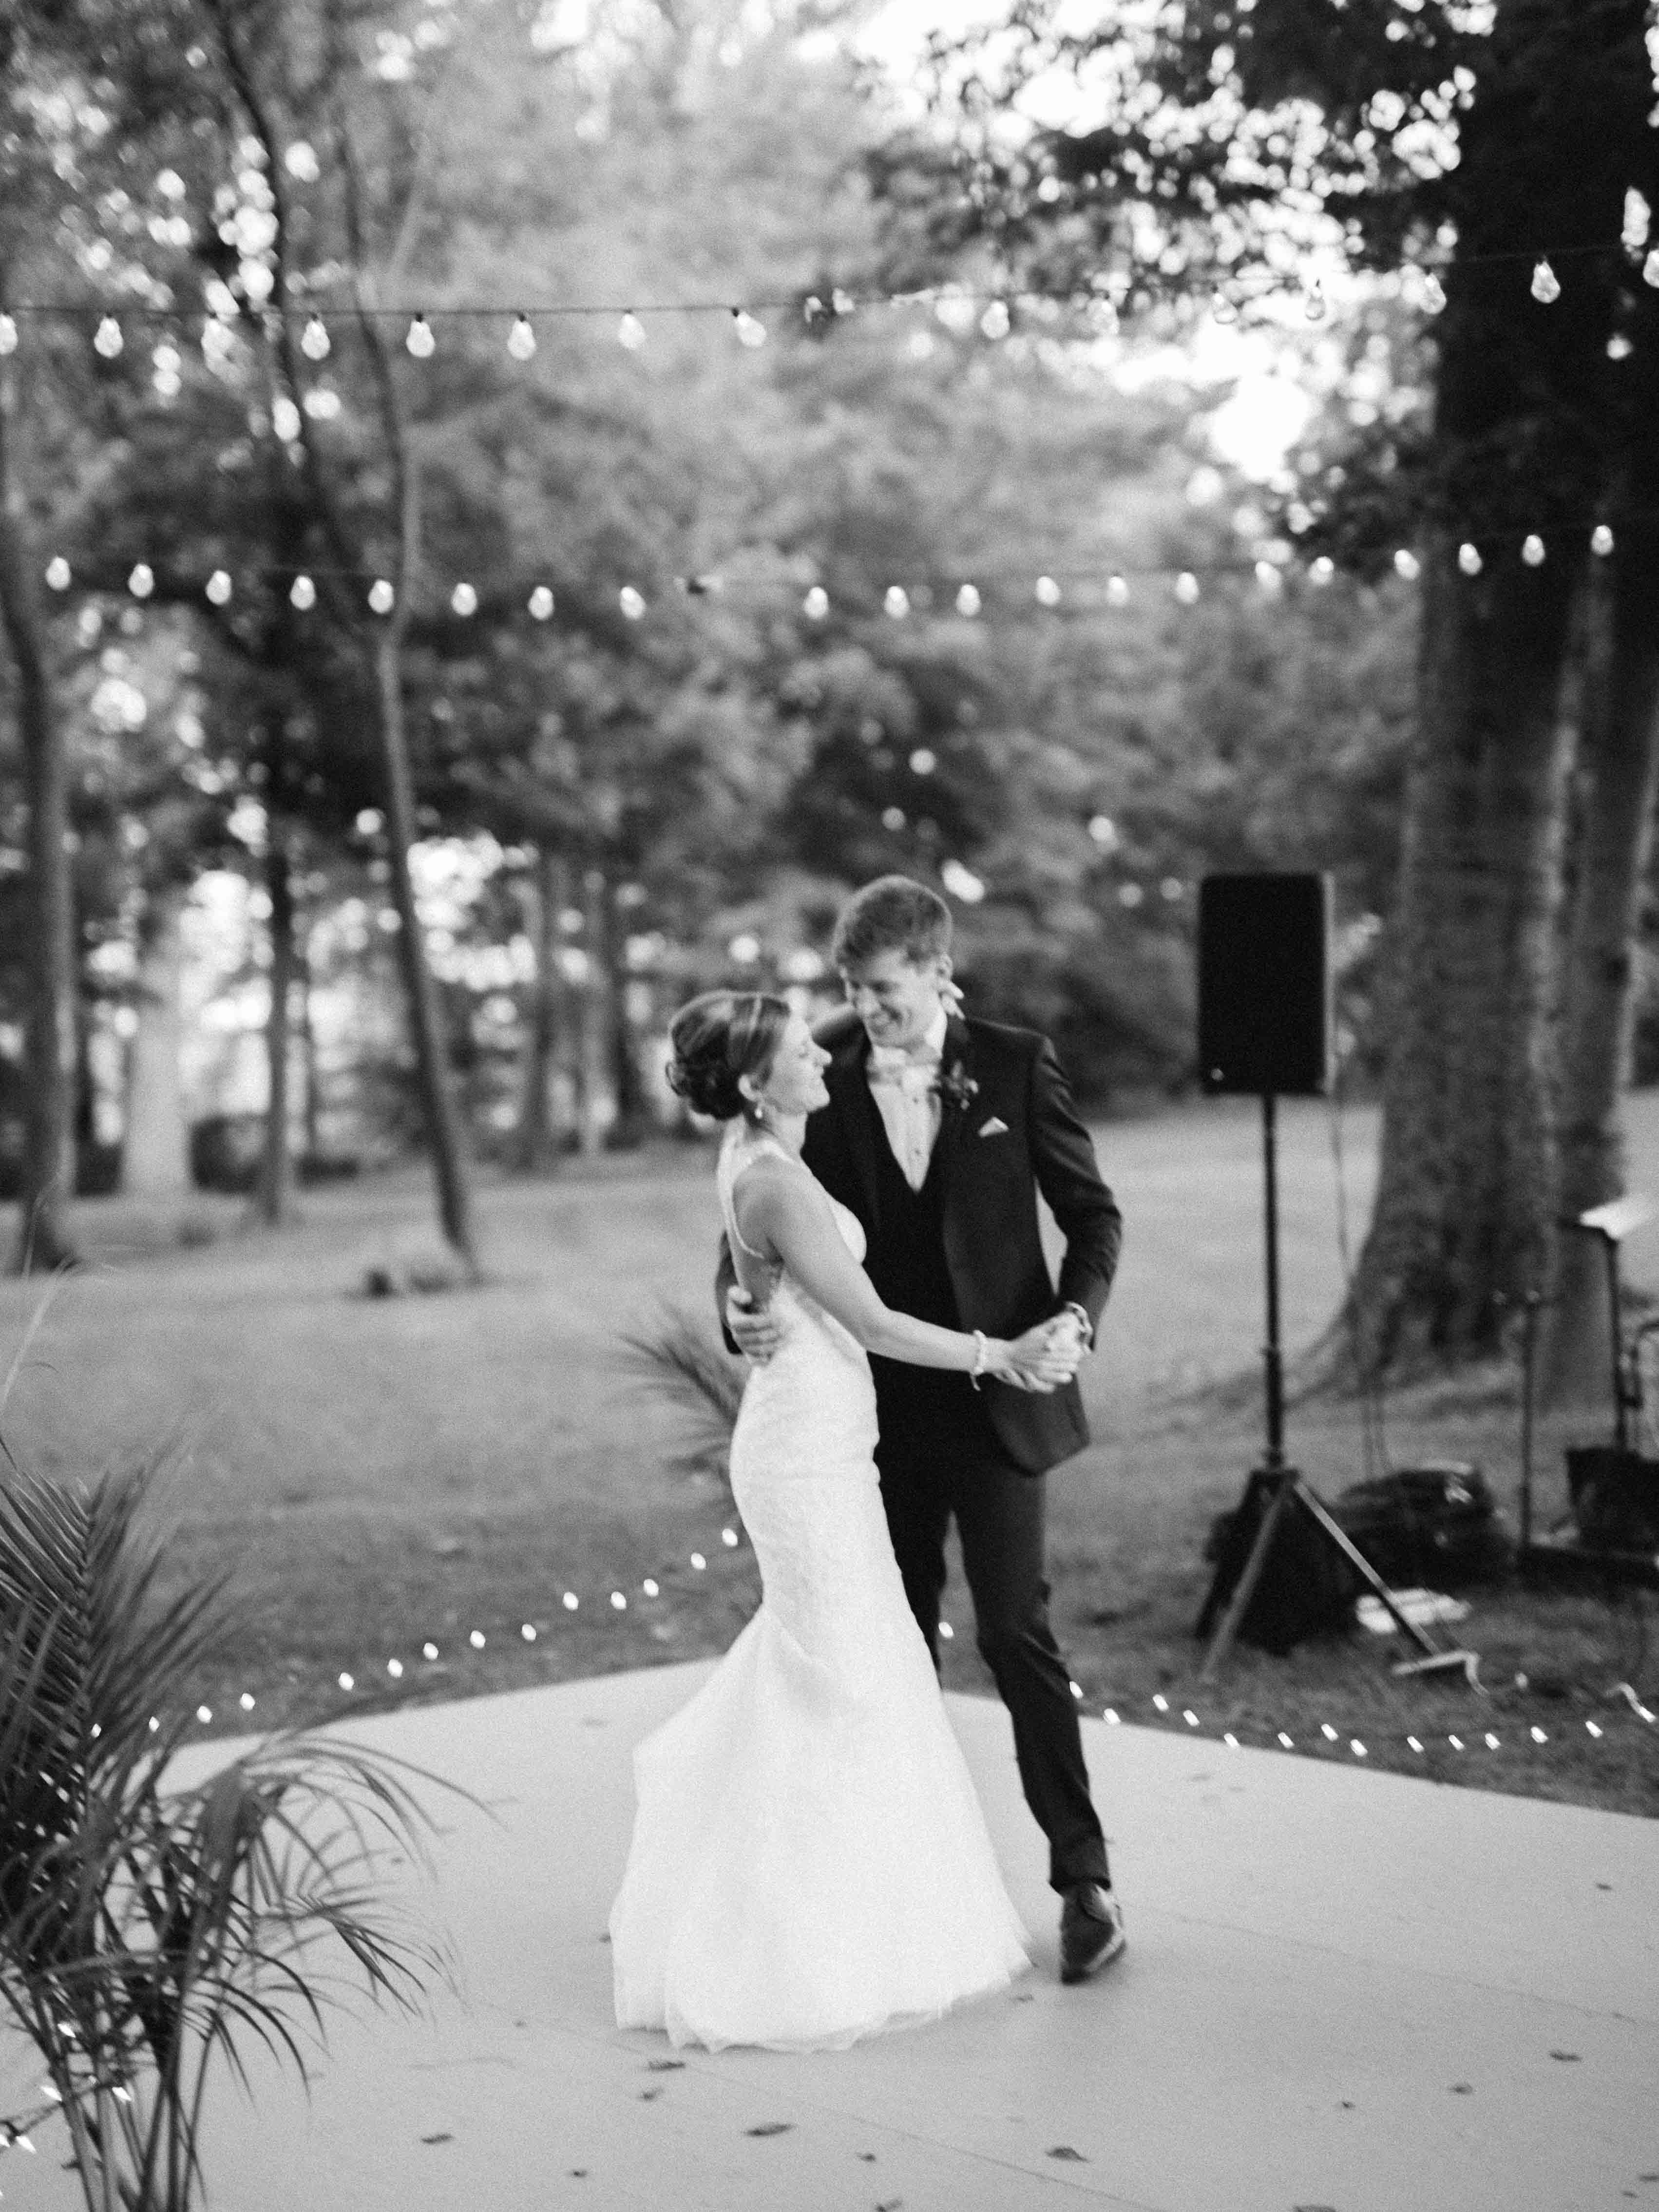 Black and White Photo of Couple Dancing